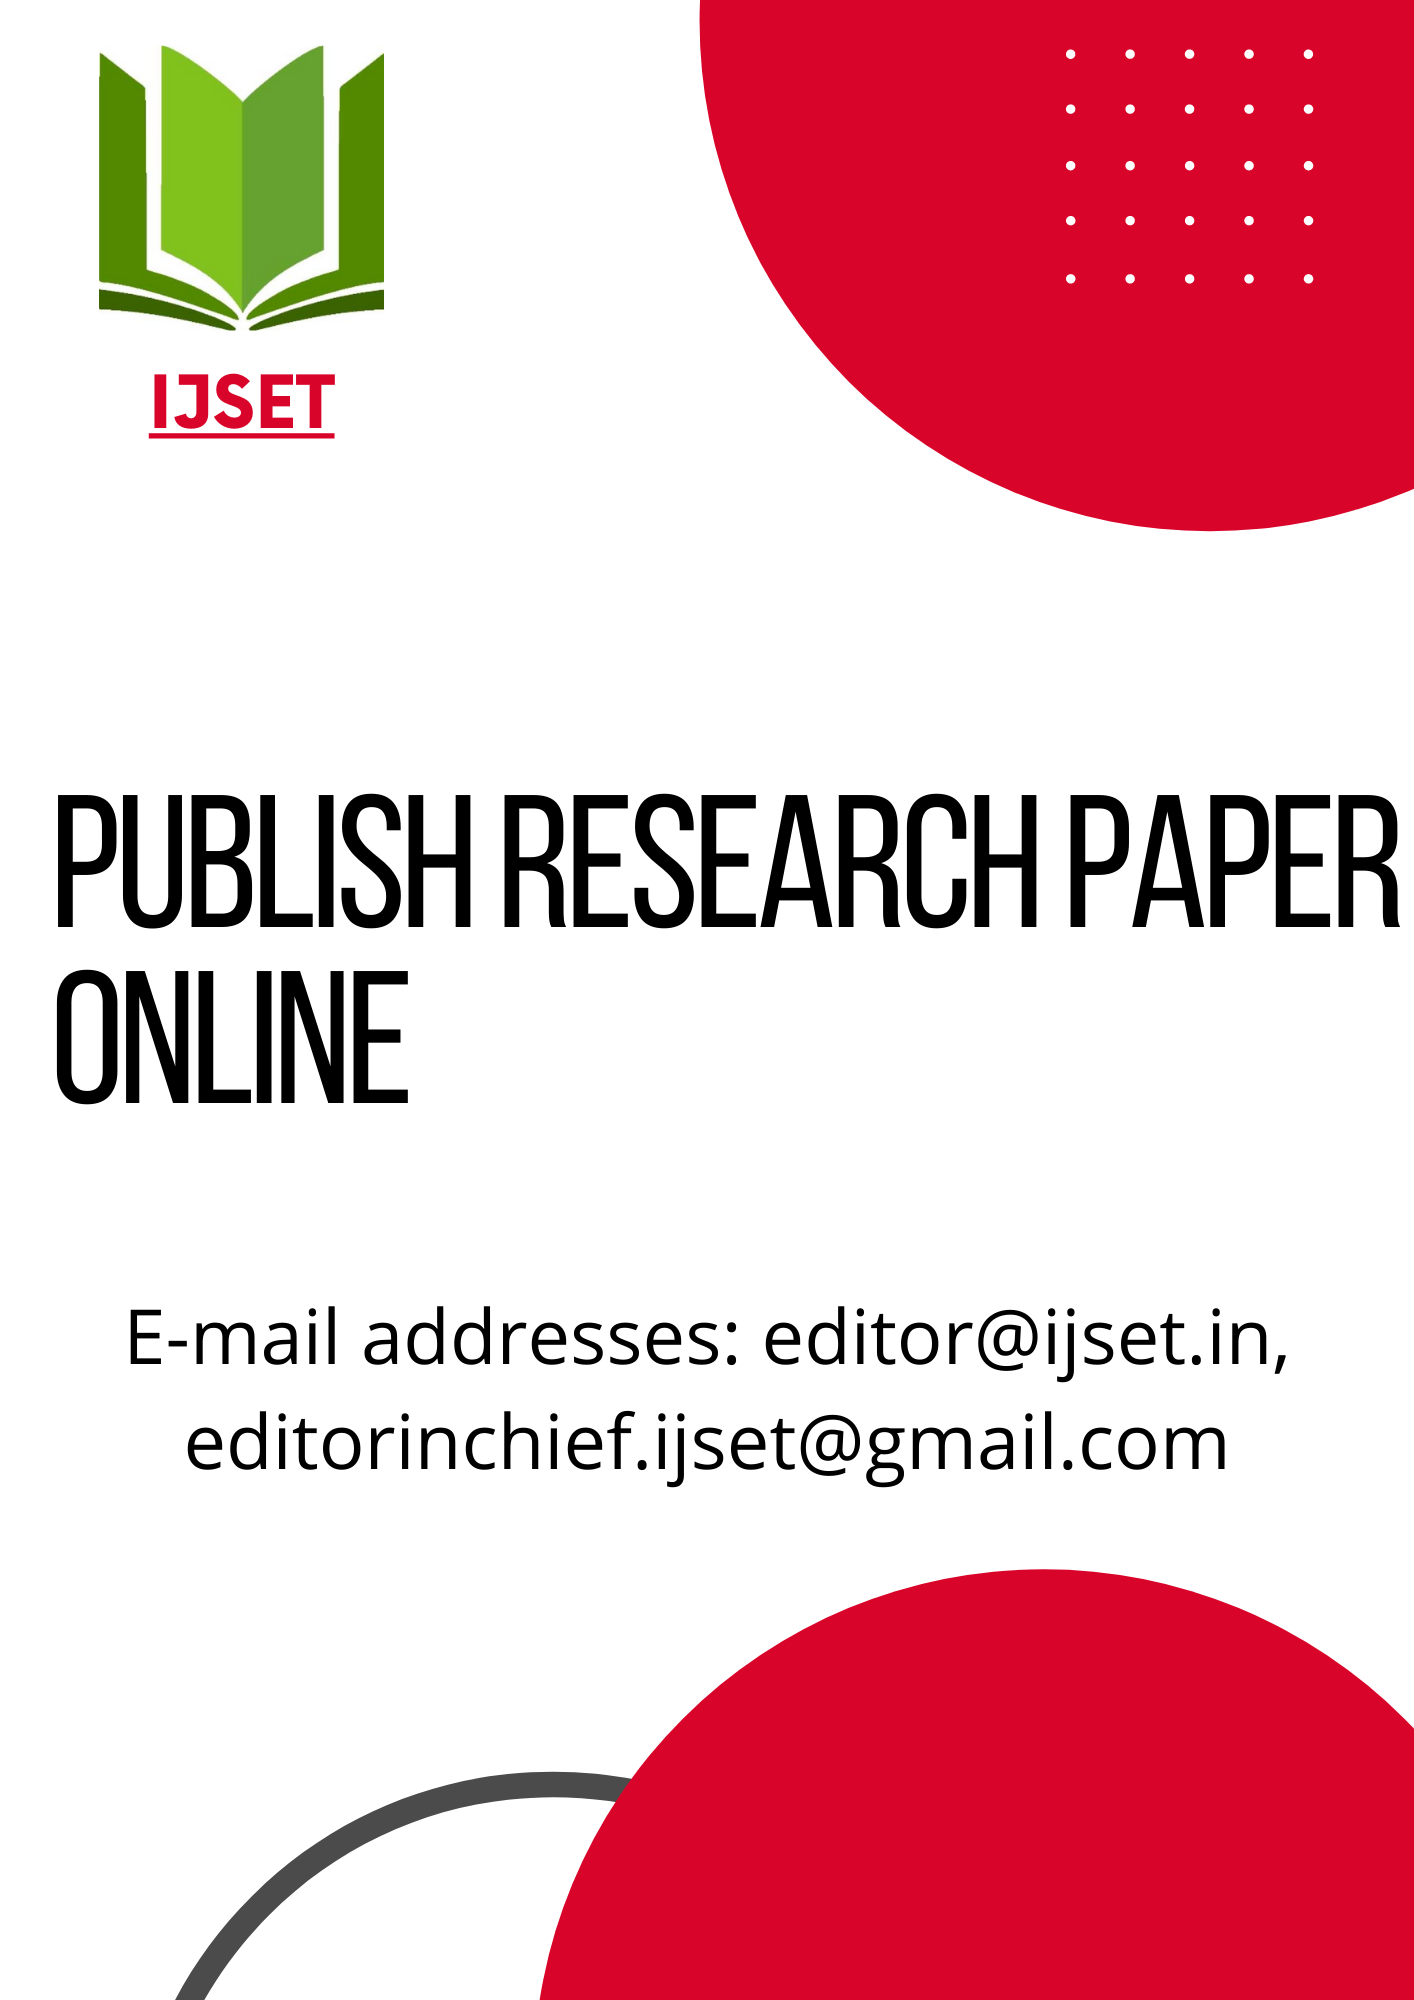 publish research paper online for free